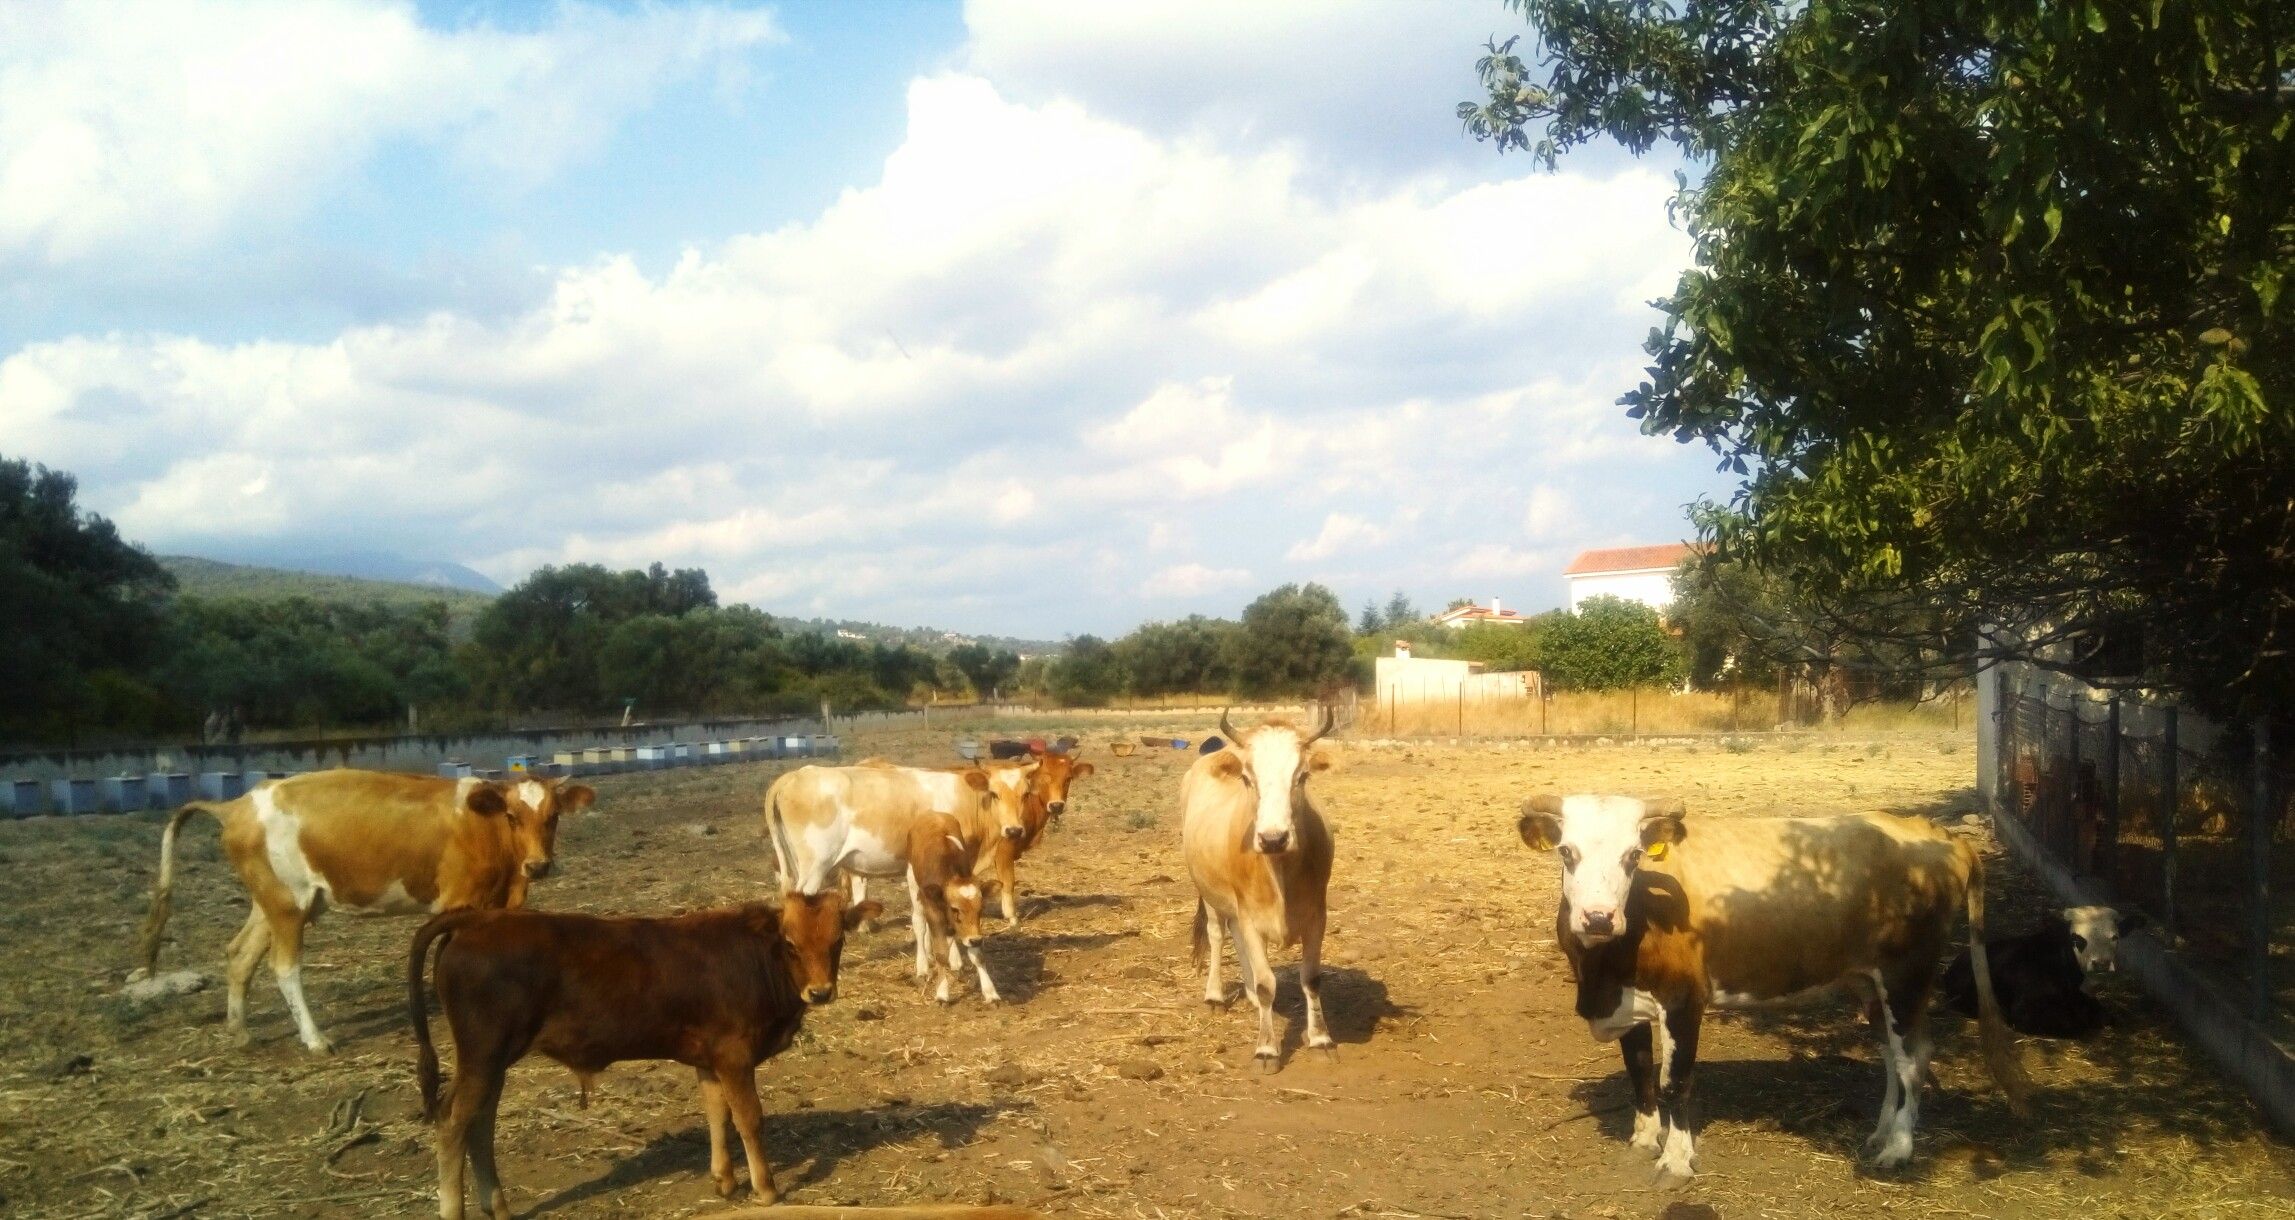 Cows in farm background